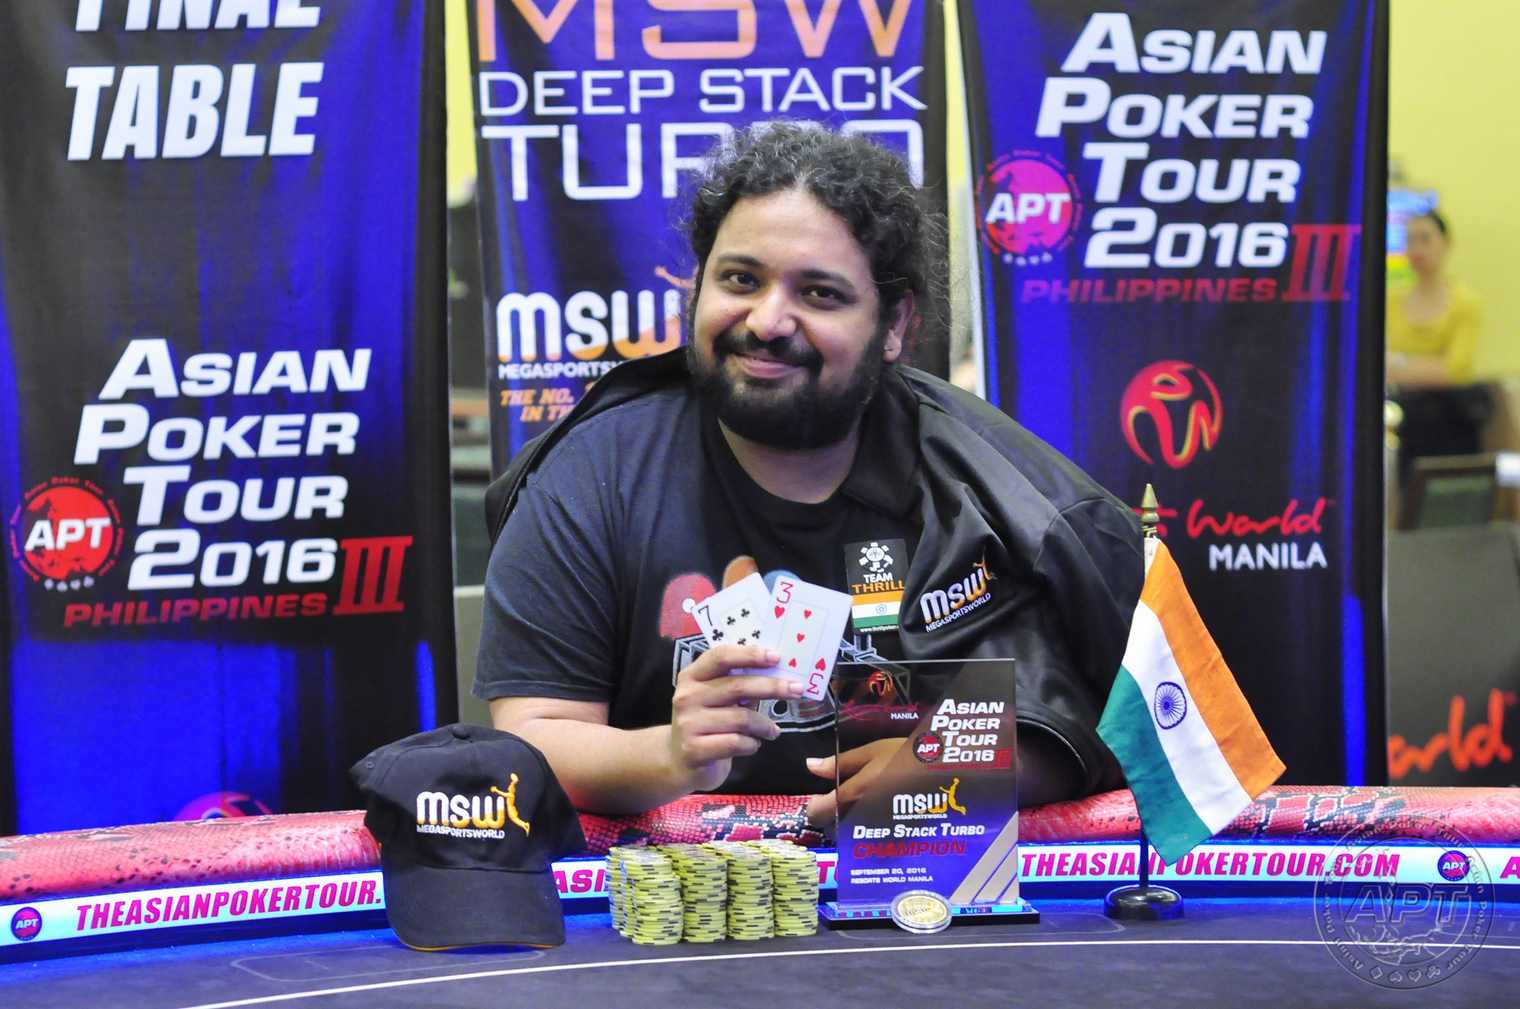 Poker in India Sees WPT, Dhava Mudgal Betting Big On Its Future